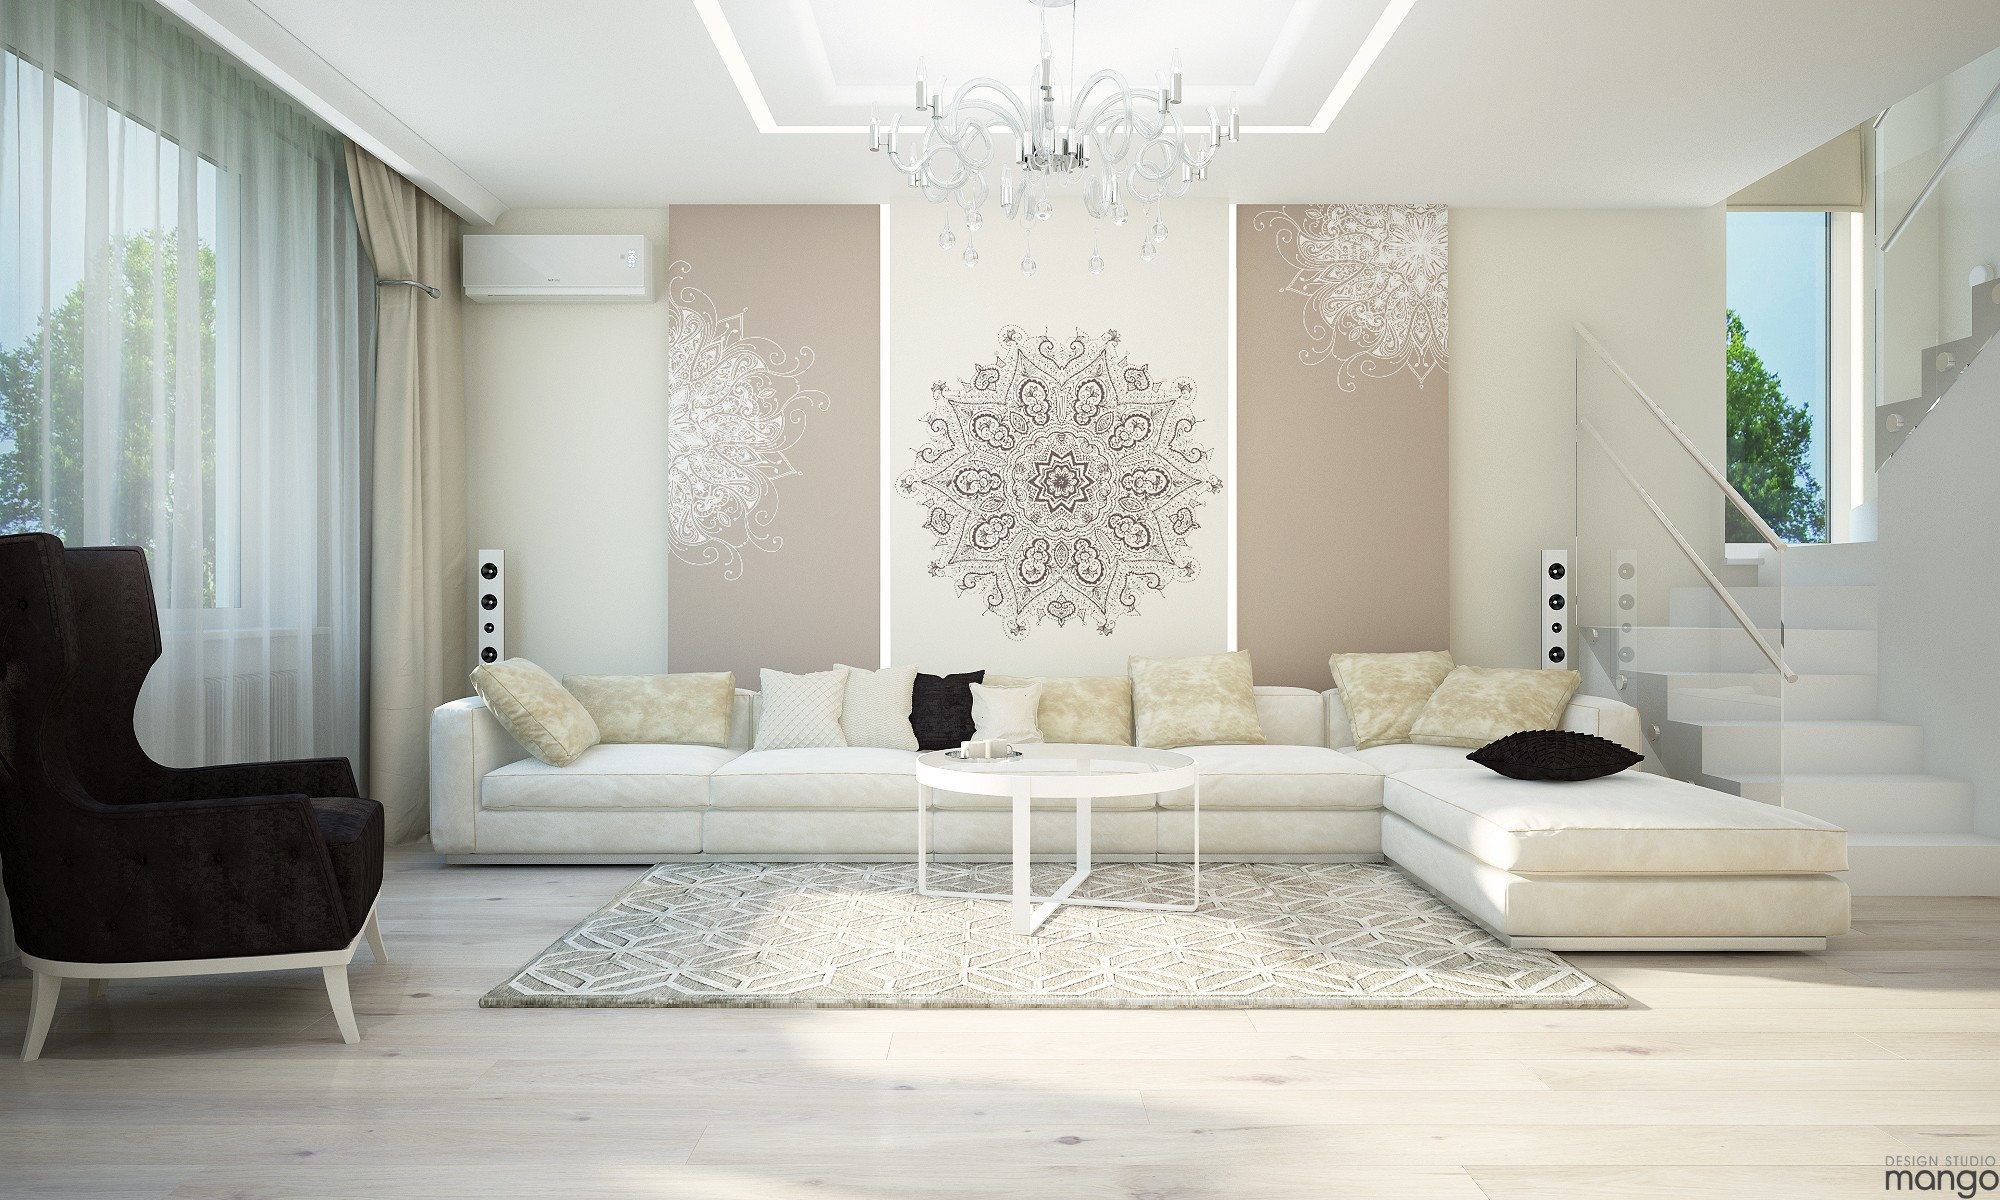 white small luxury living room "width =" 2000 "height =" 1200 "srcset =" https://mileray.com/wp-content/uploads/2020/05/1588516384_215_35-Living-Room-Designs-Completed-With-Steps-To-Arrange-Your.jpg 2000w, https: // mileray.com/wp-content/uploads/2016/09/Design-Studio-Mango6-1-300x180.jpg 300w, https://mileray.com/wp-content/uploads/2016/09/Design-Studio -Mango6 -1-768x461.jpg 768w, https://mileray.com/wp-content/uploads/2016/09/Design-Studio-Mango6-1-1024x614.jpg 1024w, https://mileray.com/wp -content / uploads / 2016/09 / Design-Studio-Mango6-1-696x418.jpg 696w, https://mileray.com/wp-content/uploads/2016/09/Design-Studio-Mango6-1-1068x641. jpg 1068w, https://mileray.com/wp-content/uploads/2016/09/Design-Studio-Mango6-1-700x420.jpg 700w "sizes =" (maximum width: 2000px) 100vw, 2000px